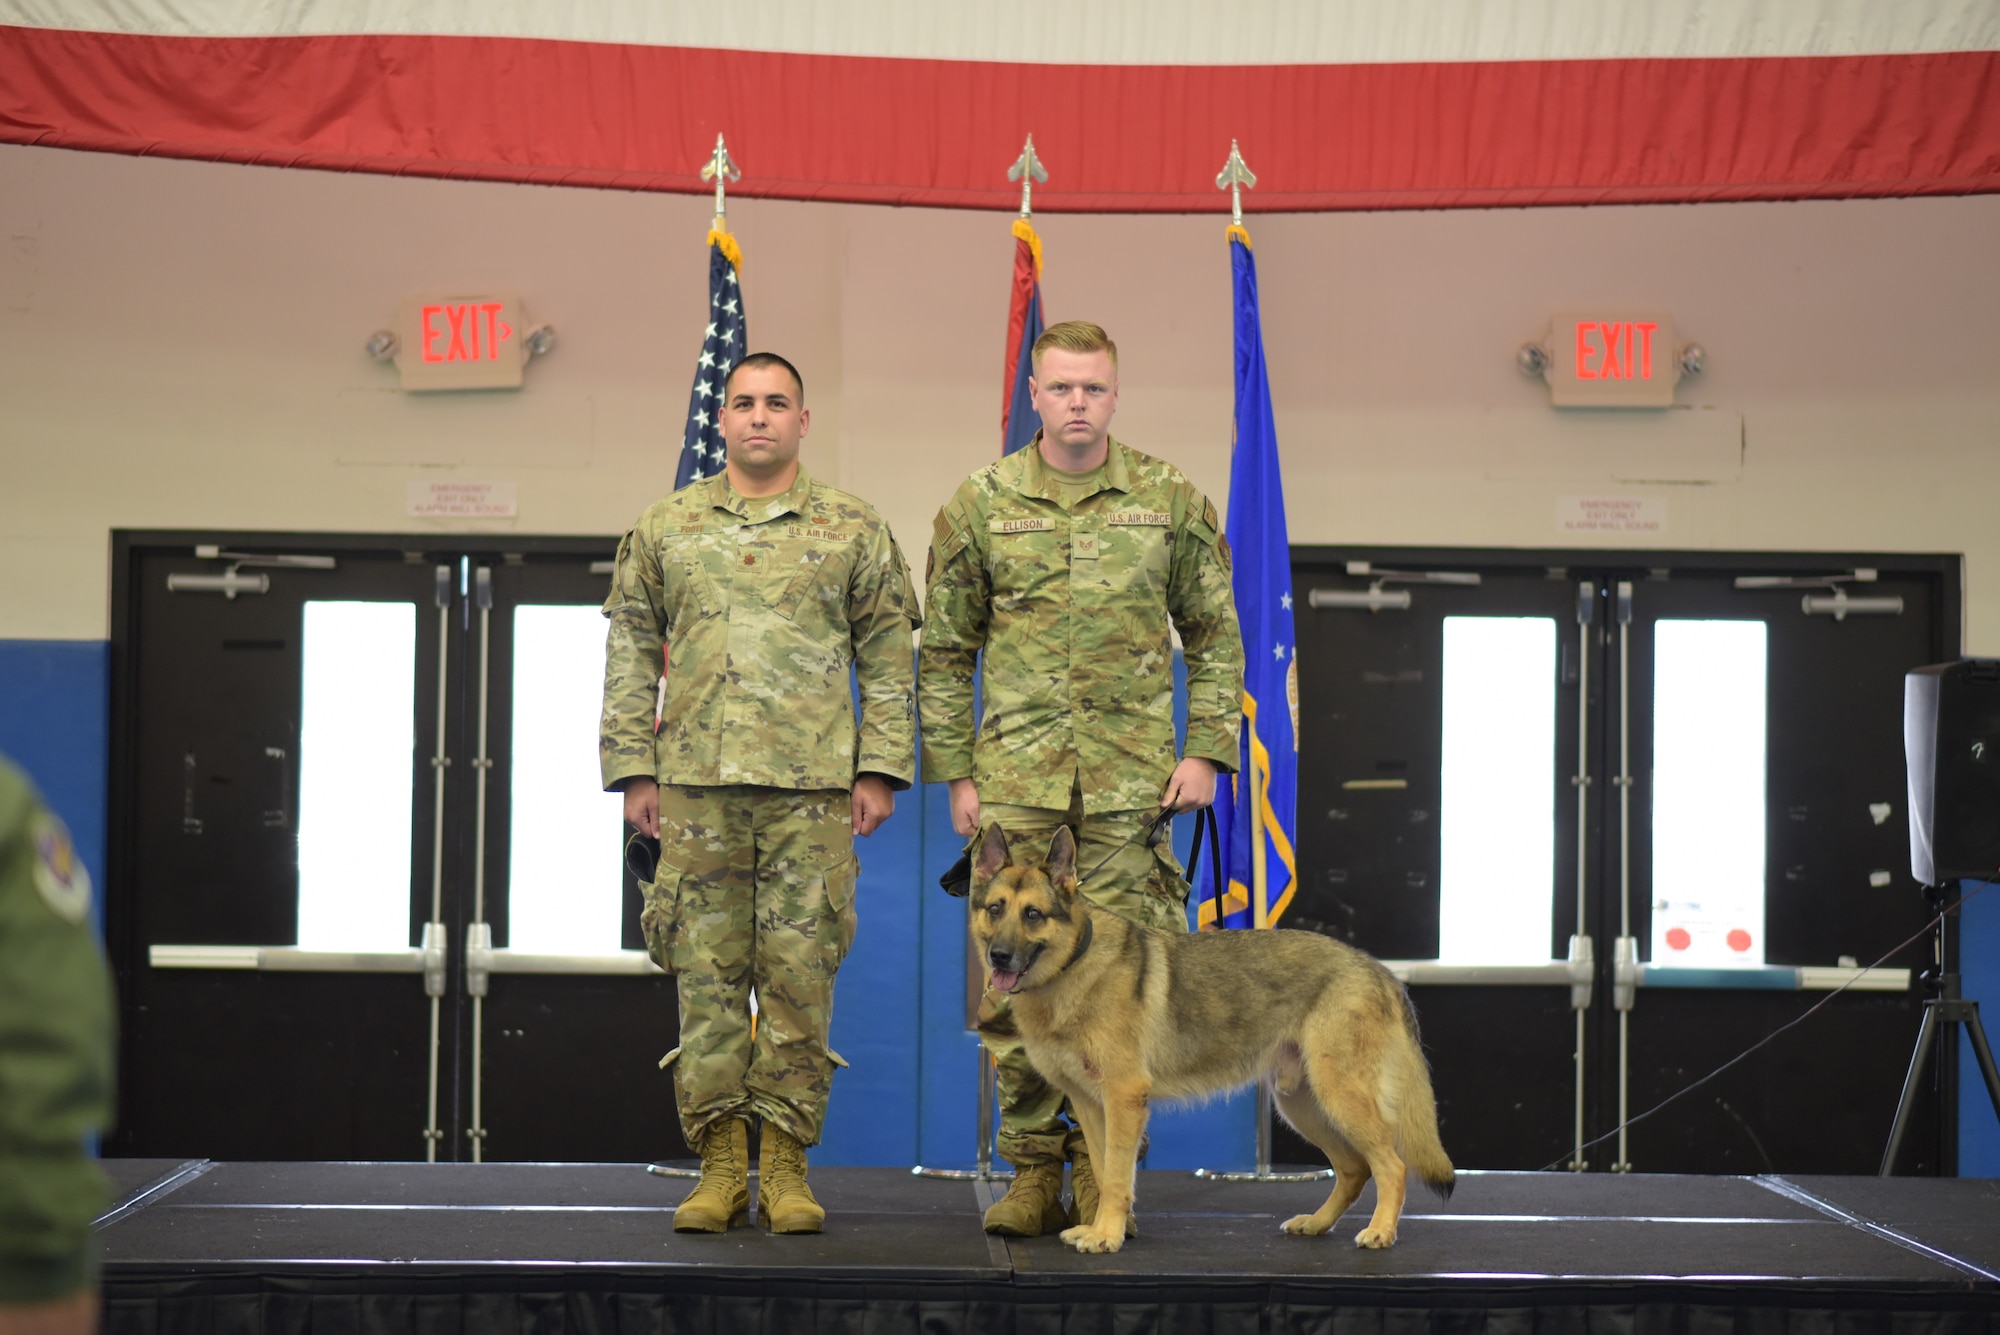 U.S. Air Force Staff Sgt. Matthew Ellison, 36th Security Forces Squadron Military Working Dog handler, escorts MWD Johnny during a retirement ceremony at Andersen Air Force Base, Guam on March 23, 2022. The ceremony recognized four MWD's with a combined 29 years of service. (U.S. Air Force photo by Airman 1st Class Emily Saxton)